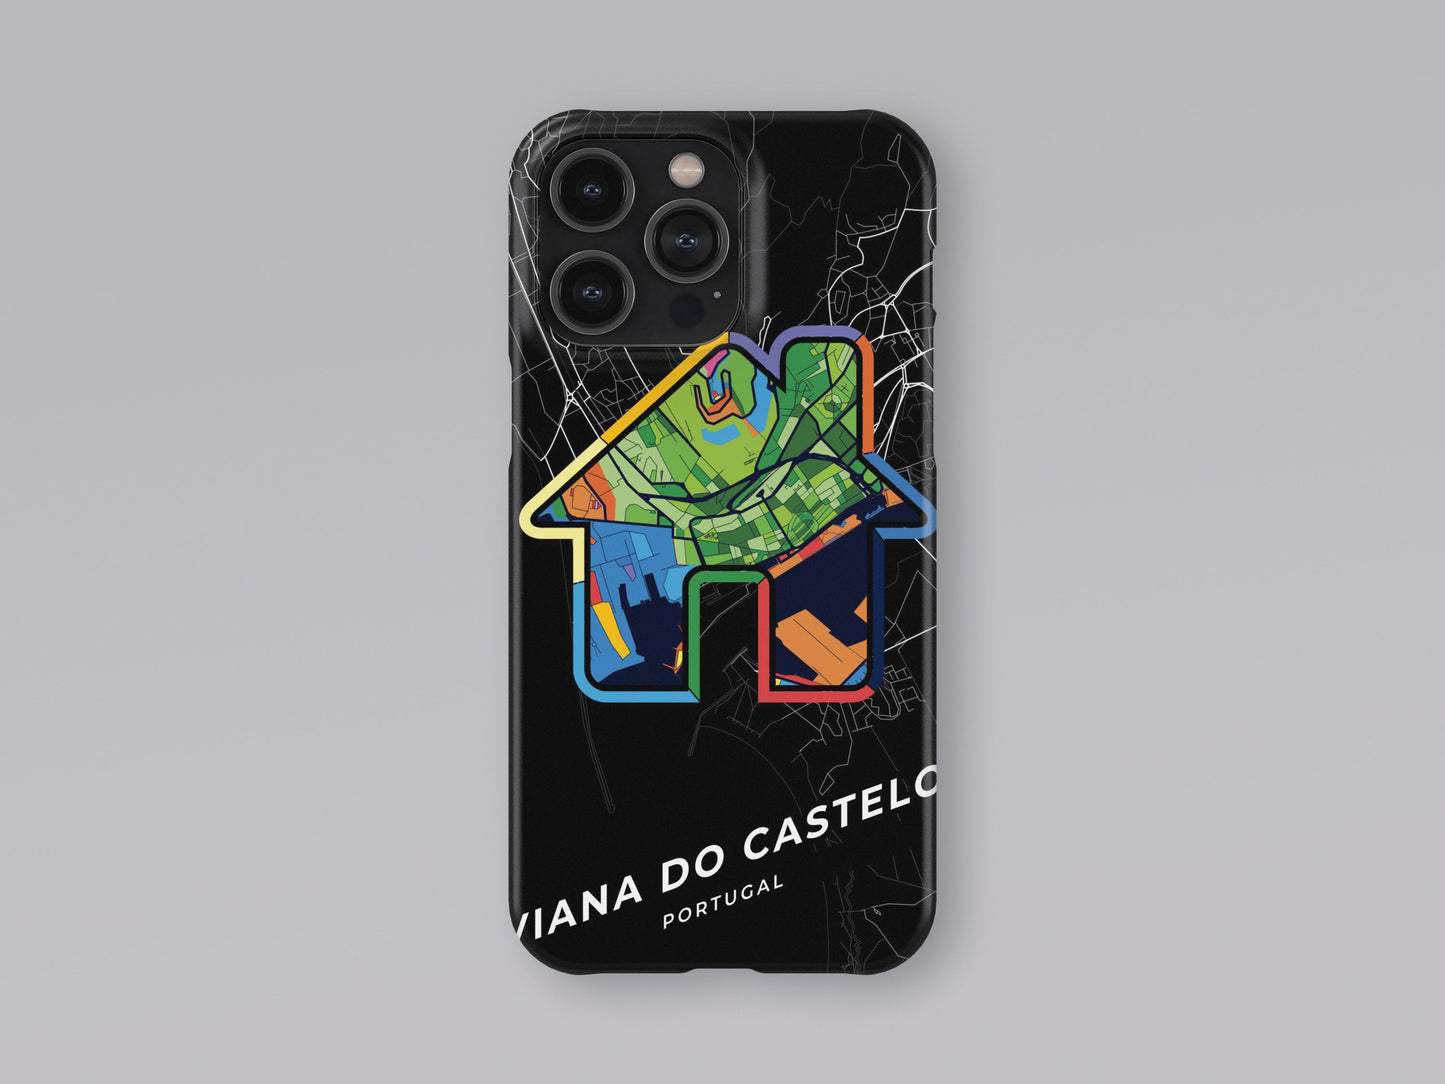 Viana Do Castelo Portugal slim phone case with colorful icon 3